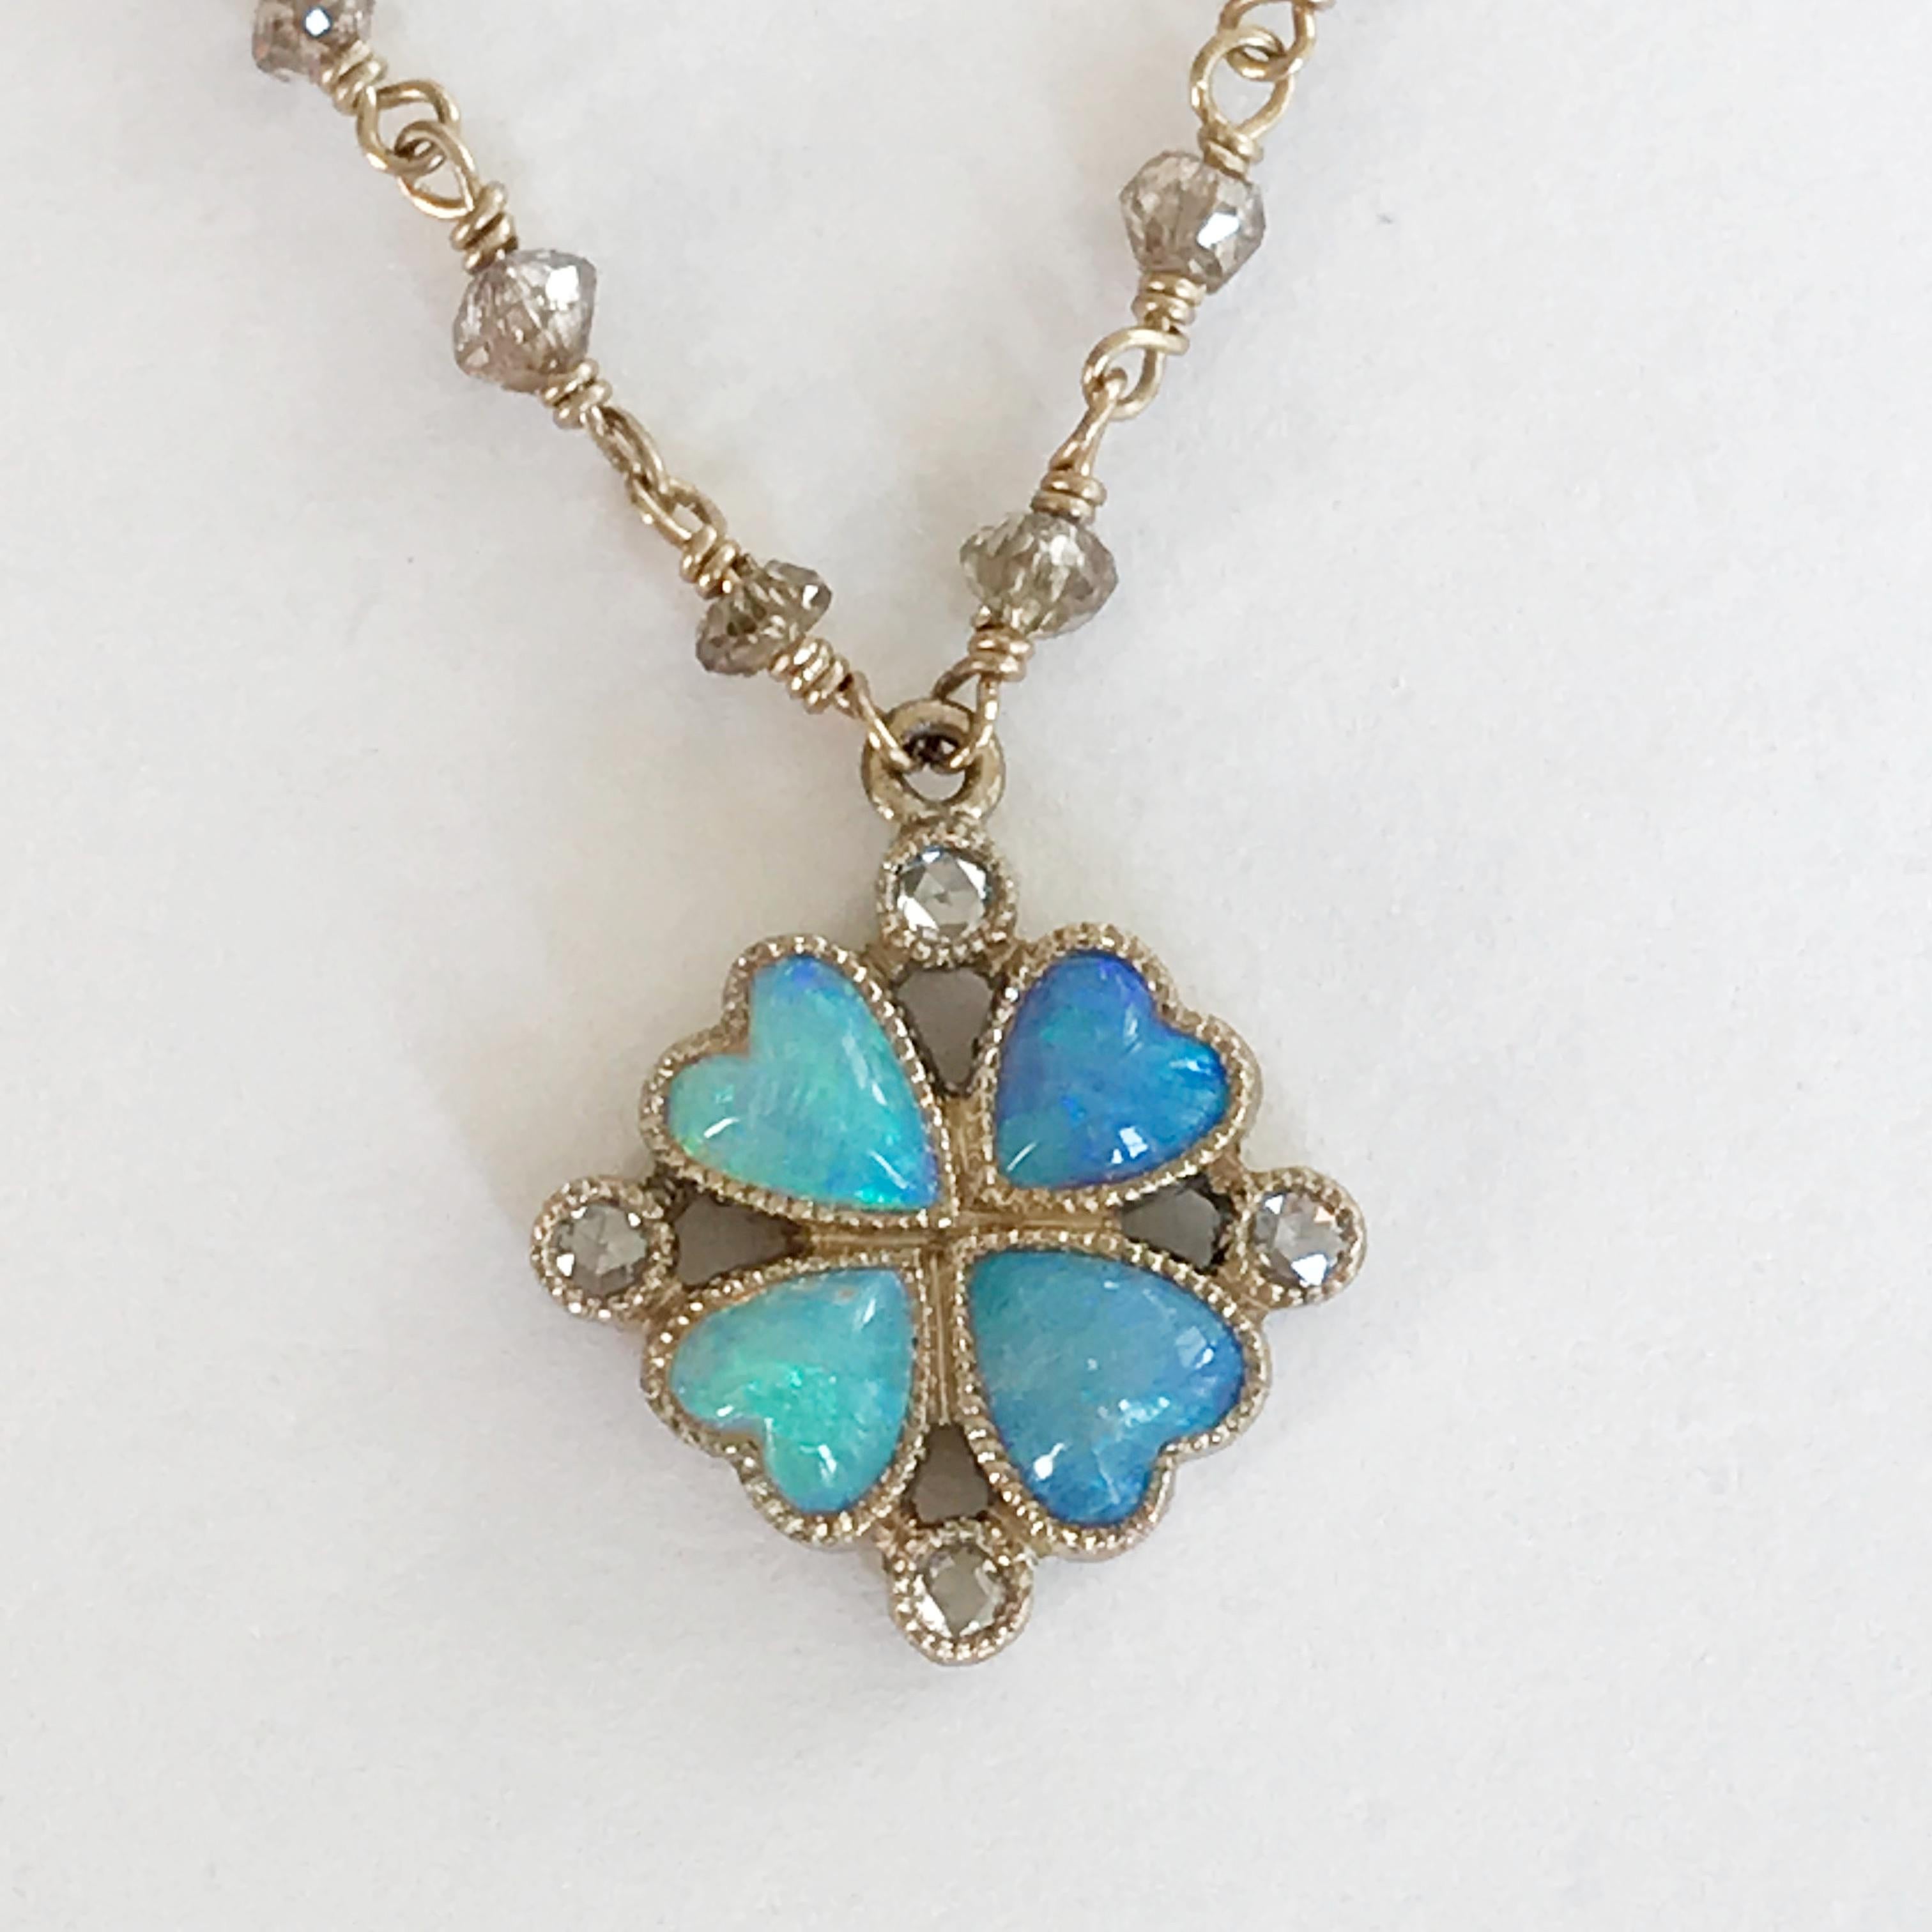 Dalben design hand crafted necklace composed of a  four-leaf clover with 4 heart shape Australian Opals and 4 rose cut  Diamonds weighing 0,03 ct  mounted on a white gold 18k rosary-style chain with faceted light brown diamond beads spaced at even